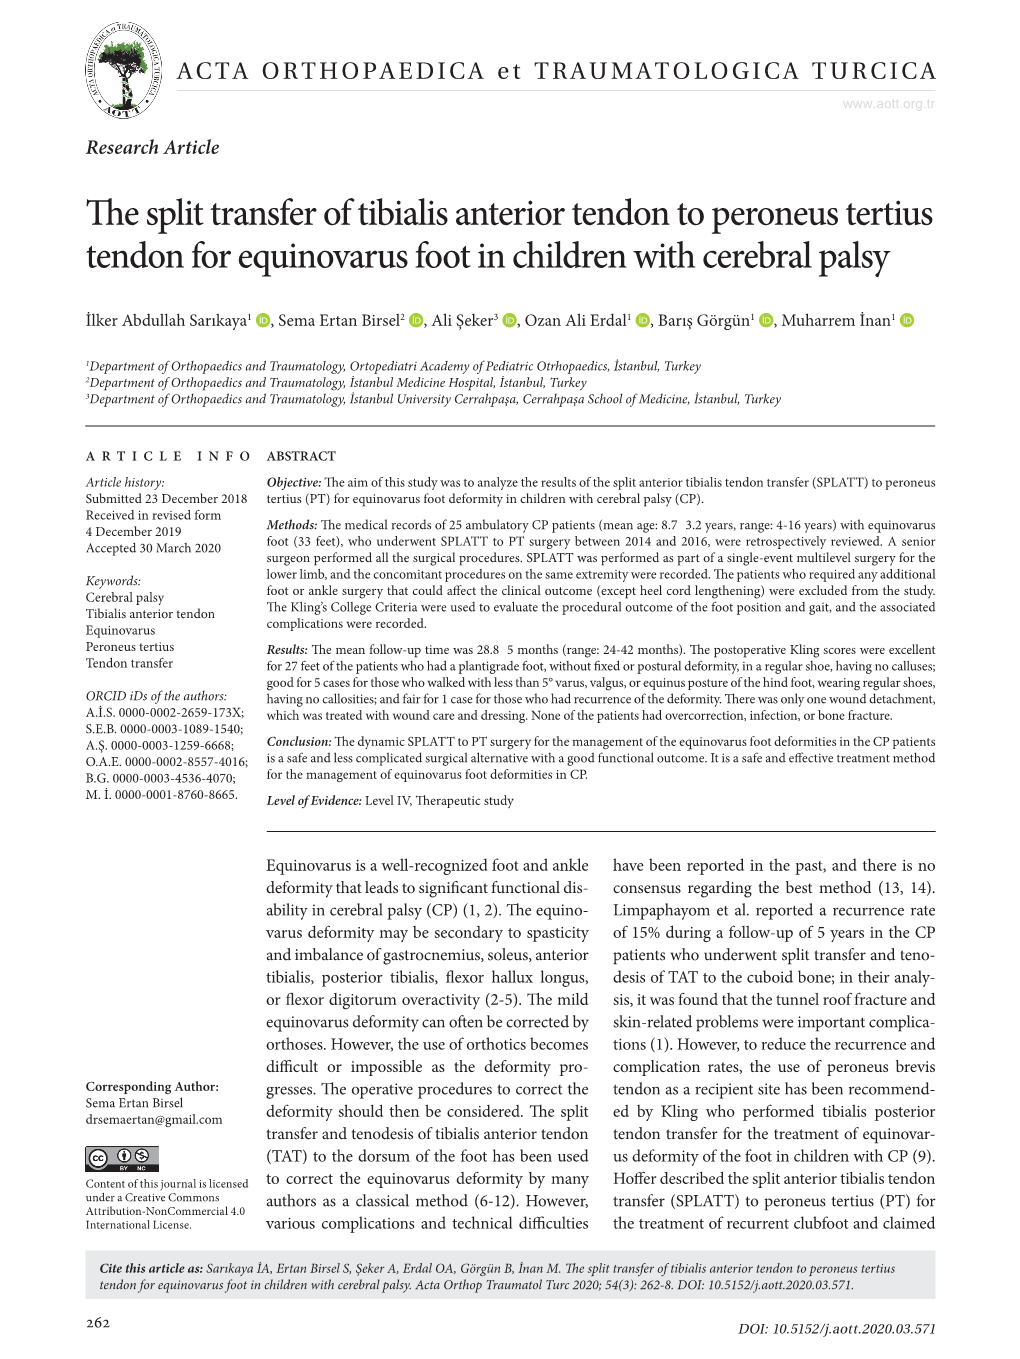 The Split Transfer of Tibialis Anterior Tendon to Peroneus Tertius Tendon for Equinovarus Foot in Children with Cerebral Palsy